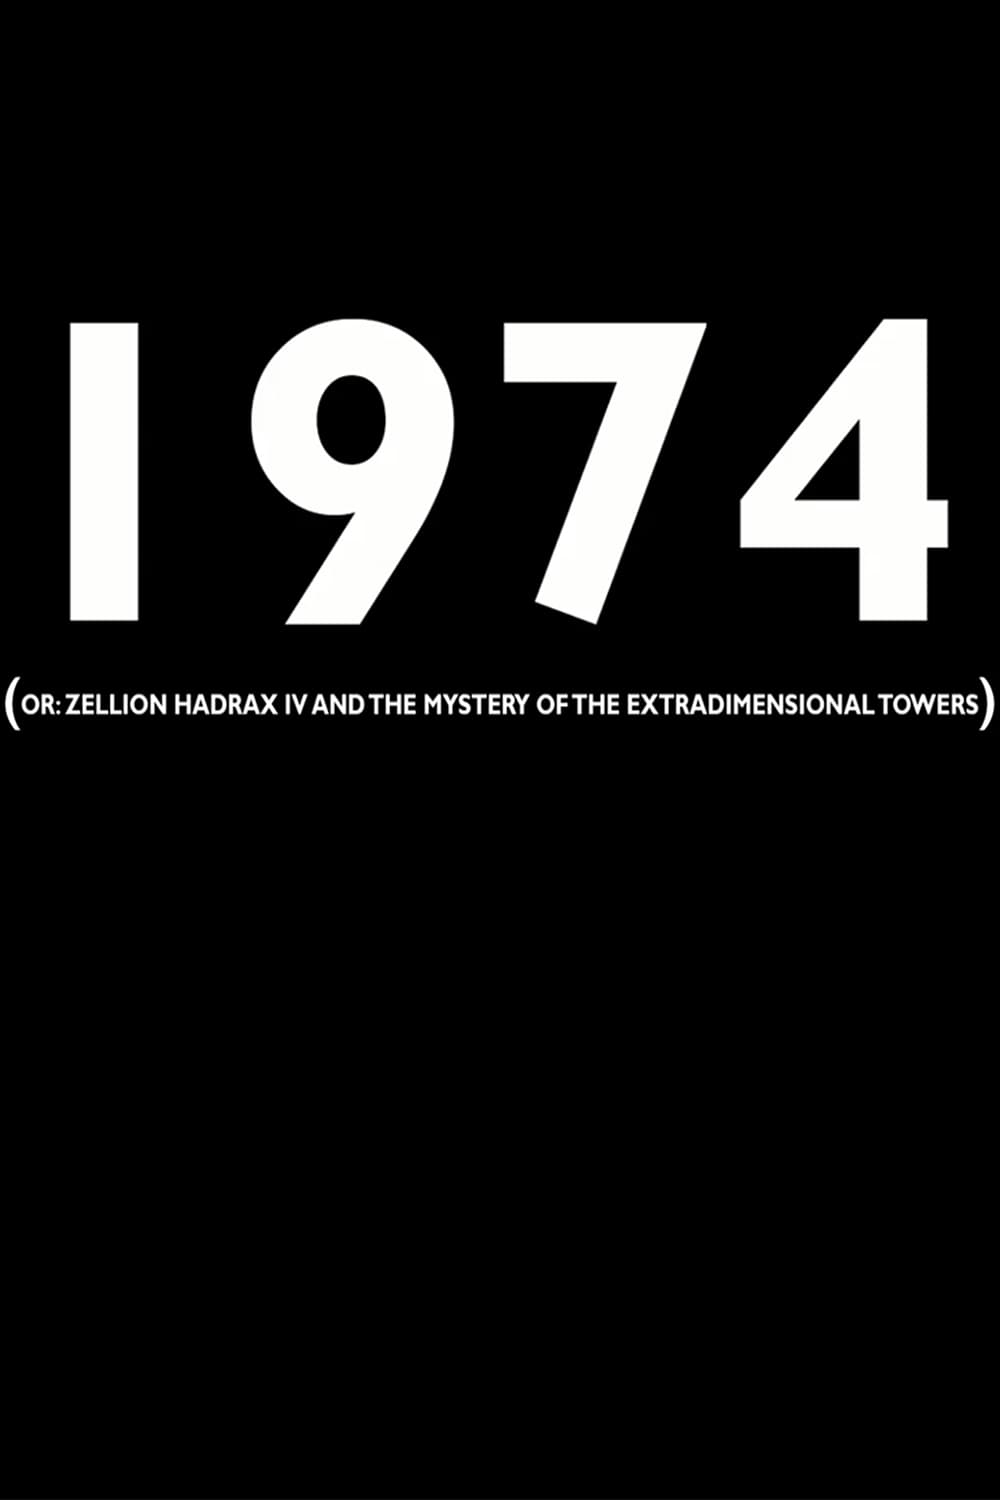 1974 (or: Zellion Hadrax IV and the mystery of the extradimensional towers)